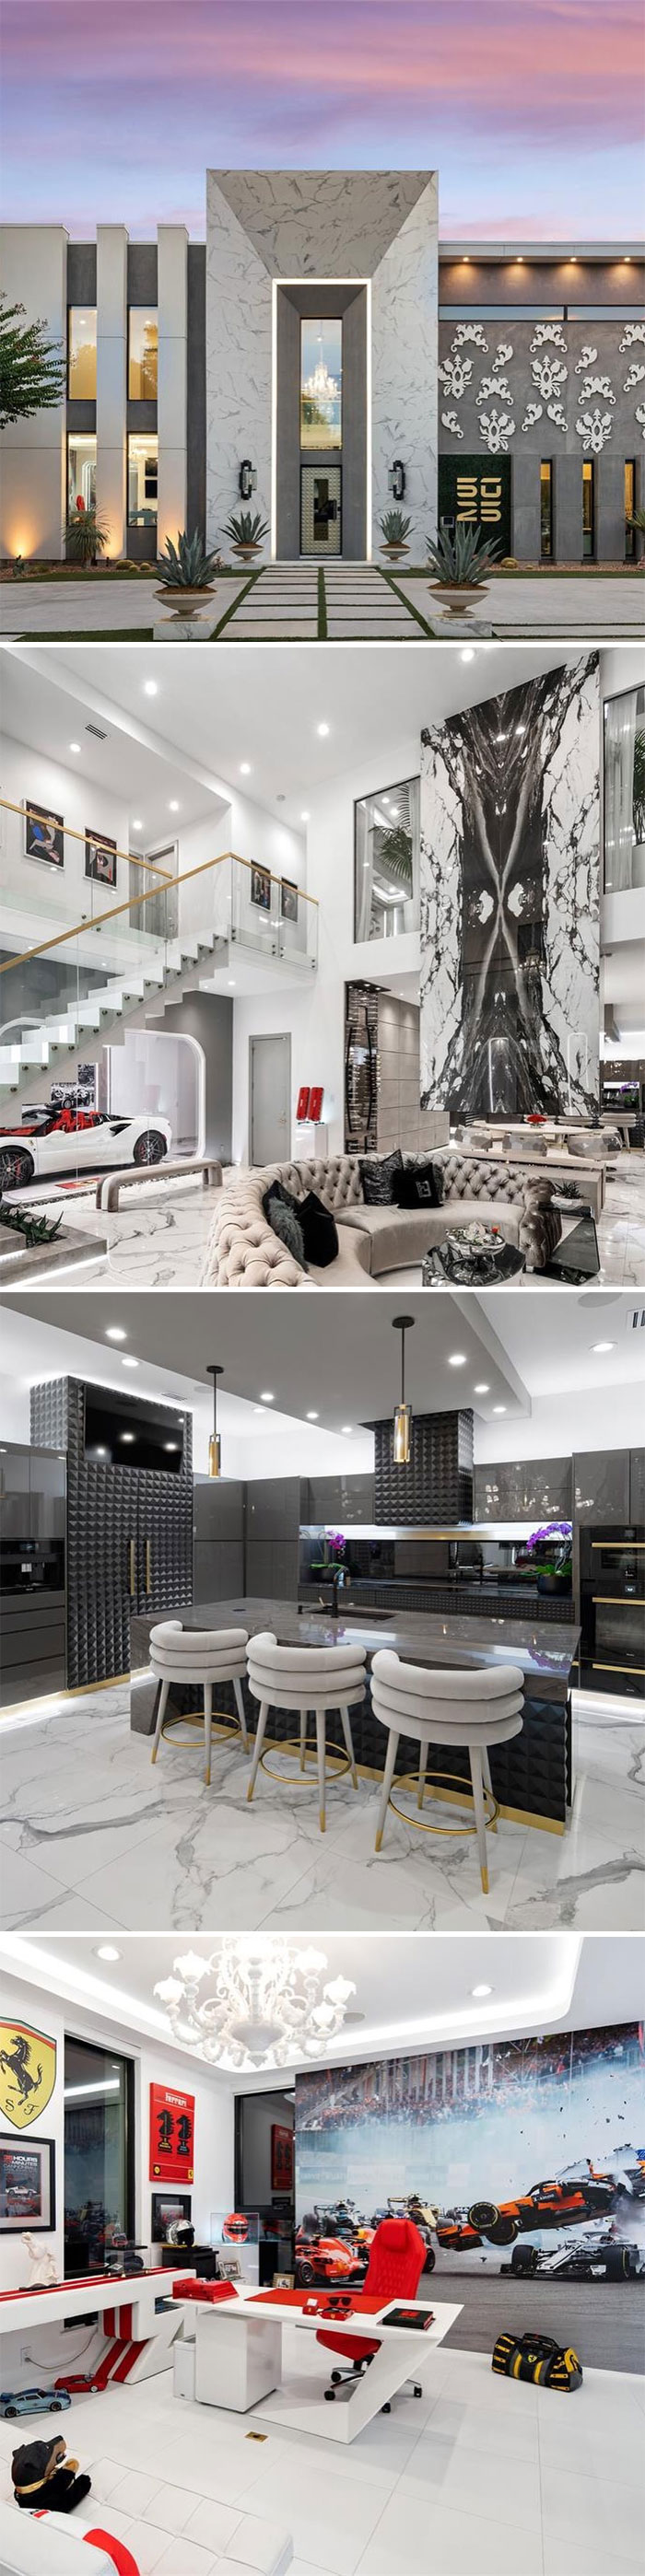 Verified When A Listing Says A Home Is “Inspired By The Blockbuster Film Tron: Legacy” You Know It’s Going To Be Good And This Dallas, Tx Home Delivers. There’s A Versace Main Suite, An 80s Speakeasy With “Turquoise Tufted Walls” And An F1 Ferrari Home Office. Currently Listed For $3,690,000. 3 Bd, 4 Ba. 4,853 Sq Ft. Link In Bio For The Listing